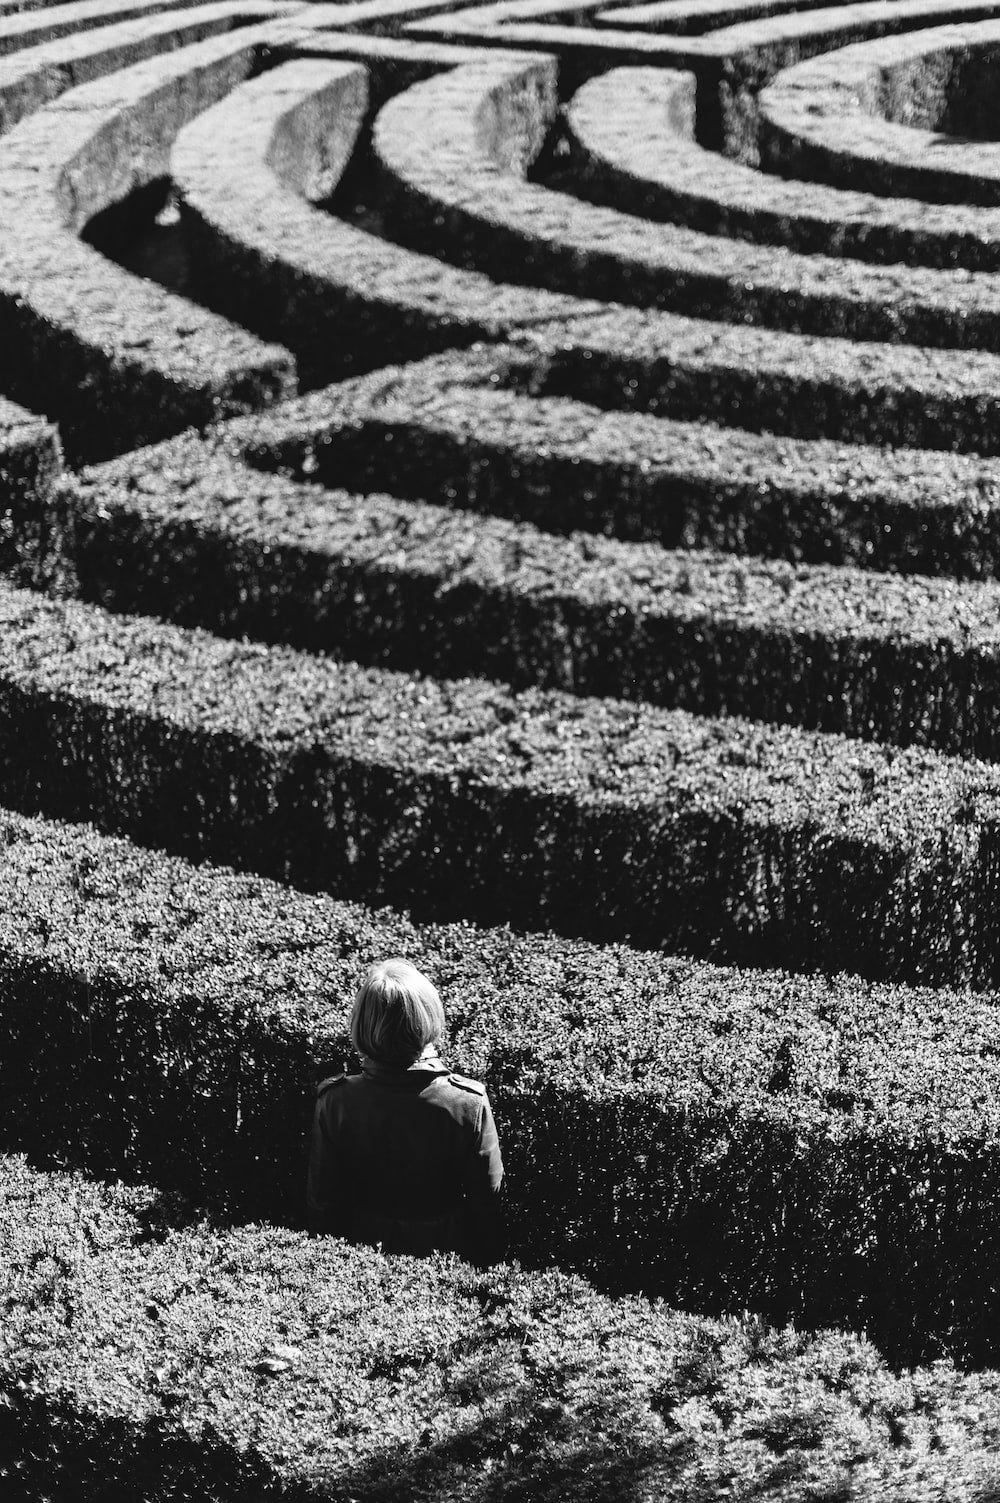 A person is standing, back turned to the picture taker, standing in a row of hedges for a chest-level (for adult) hedge maze. The image is black and white.